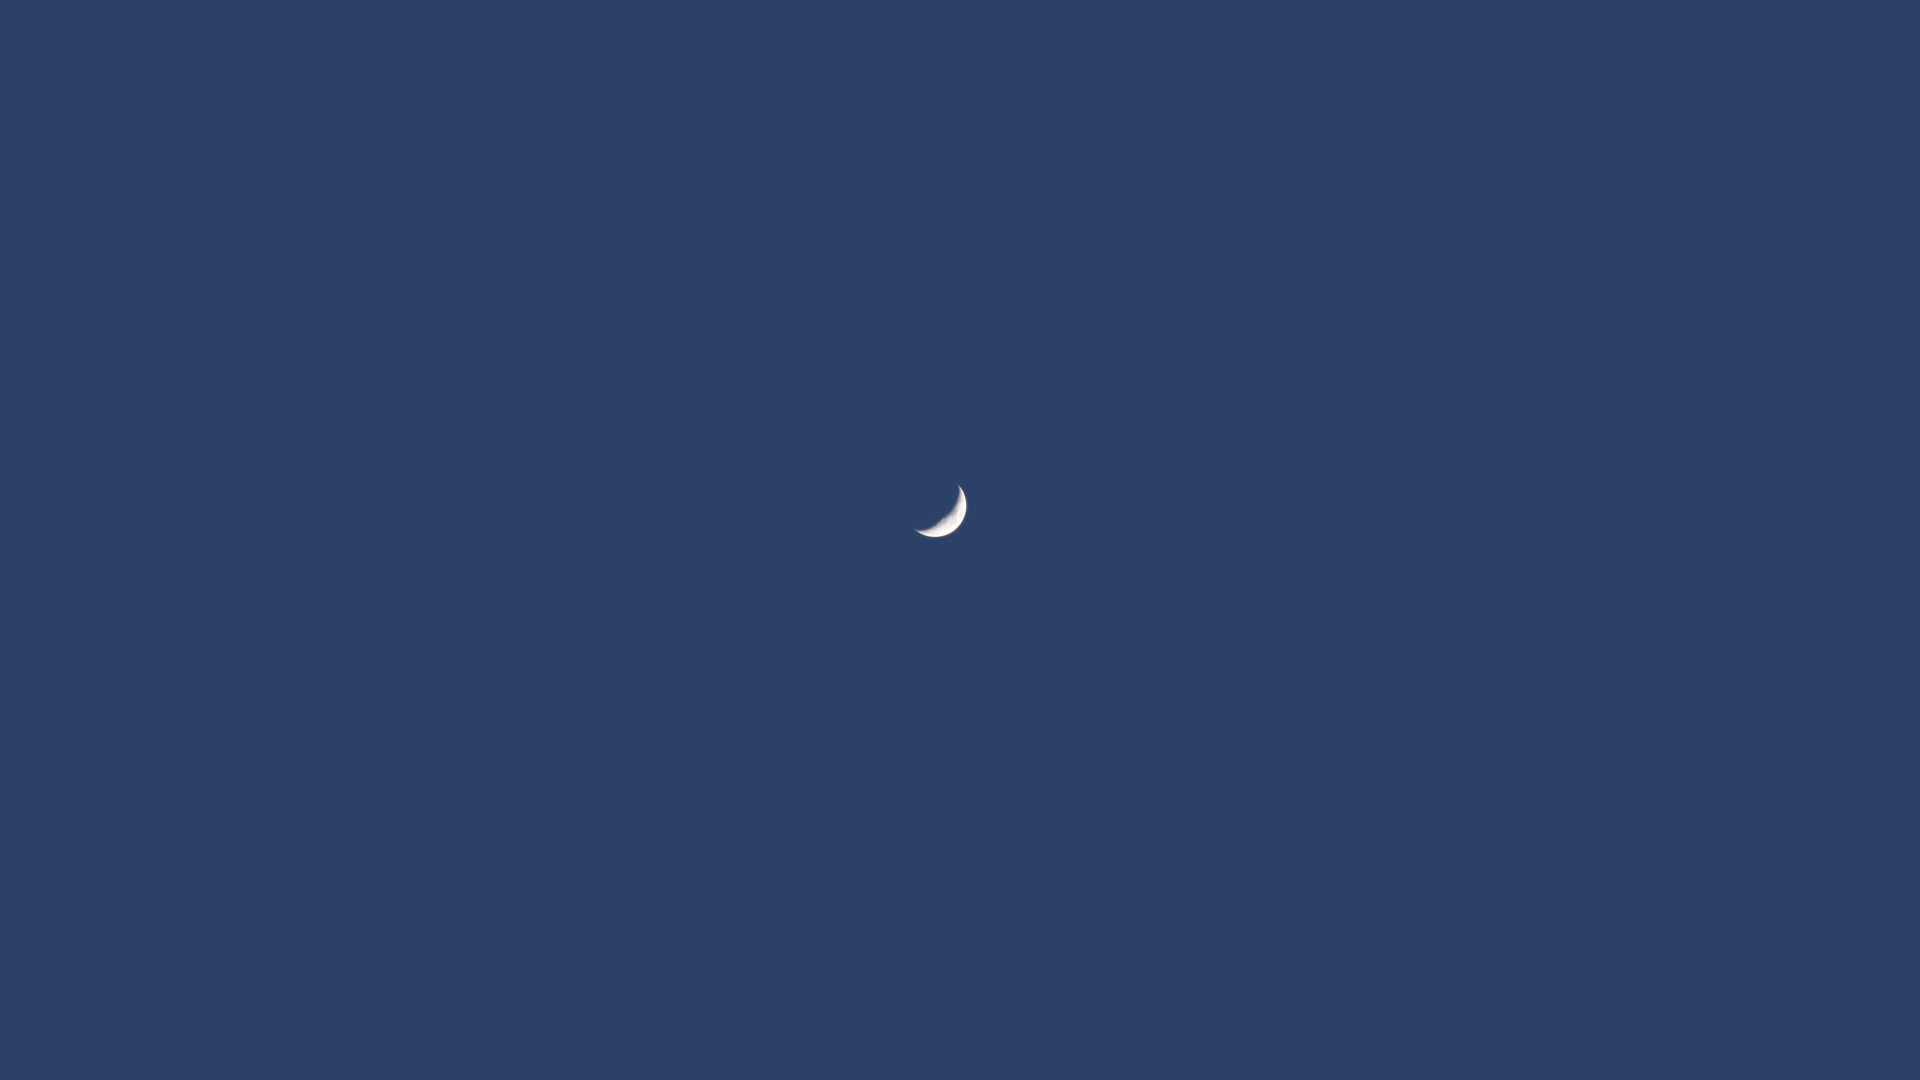 minimalism, Photography, Sky, Clear sky, Moon, Blue background Wallpaper